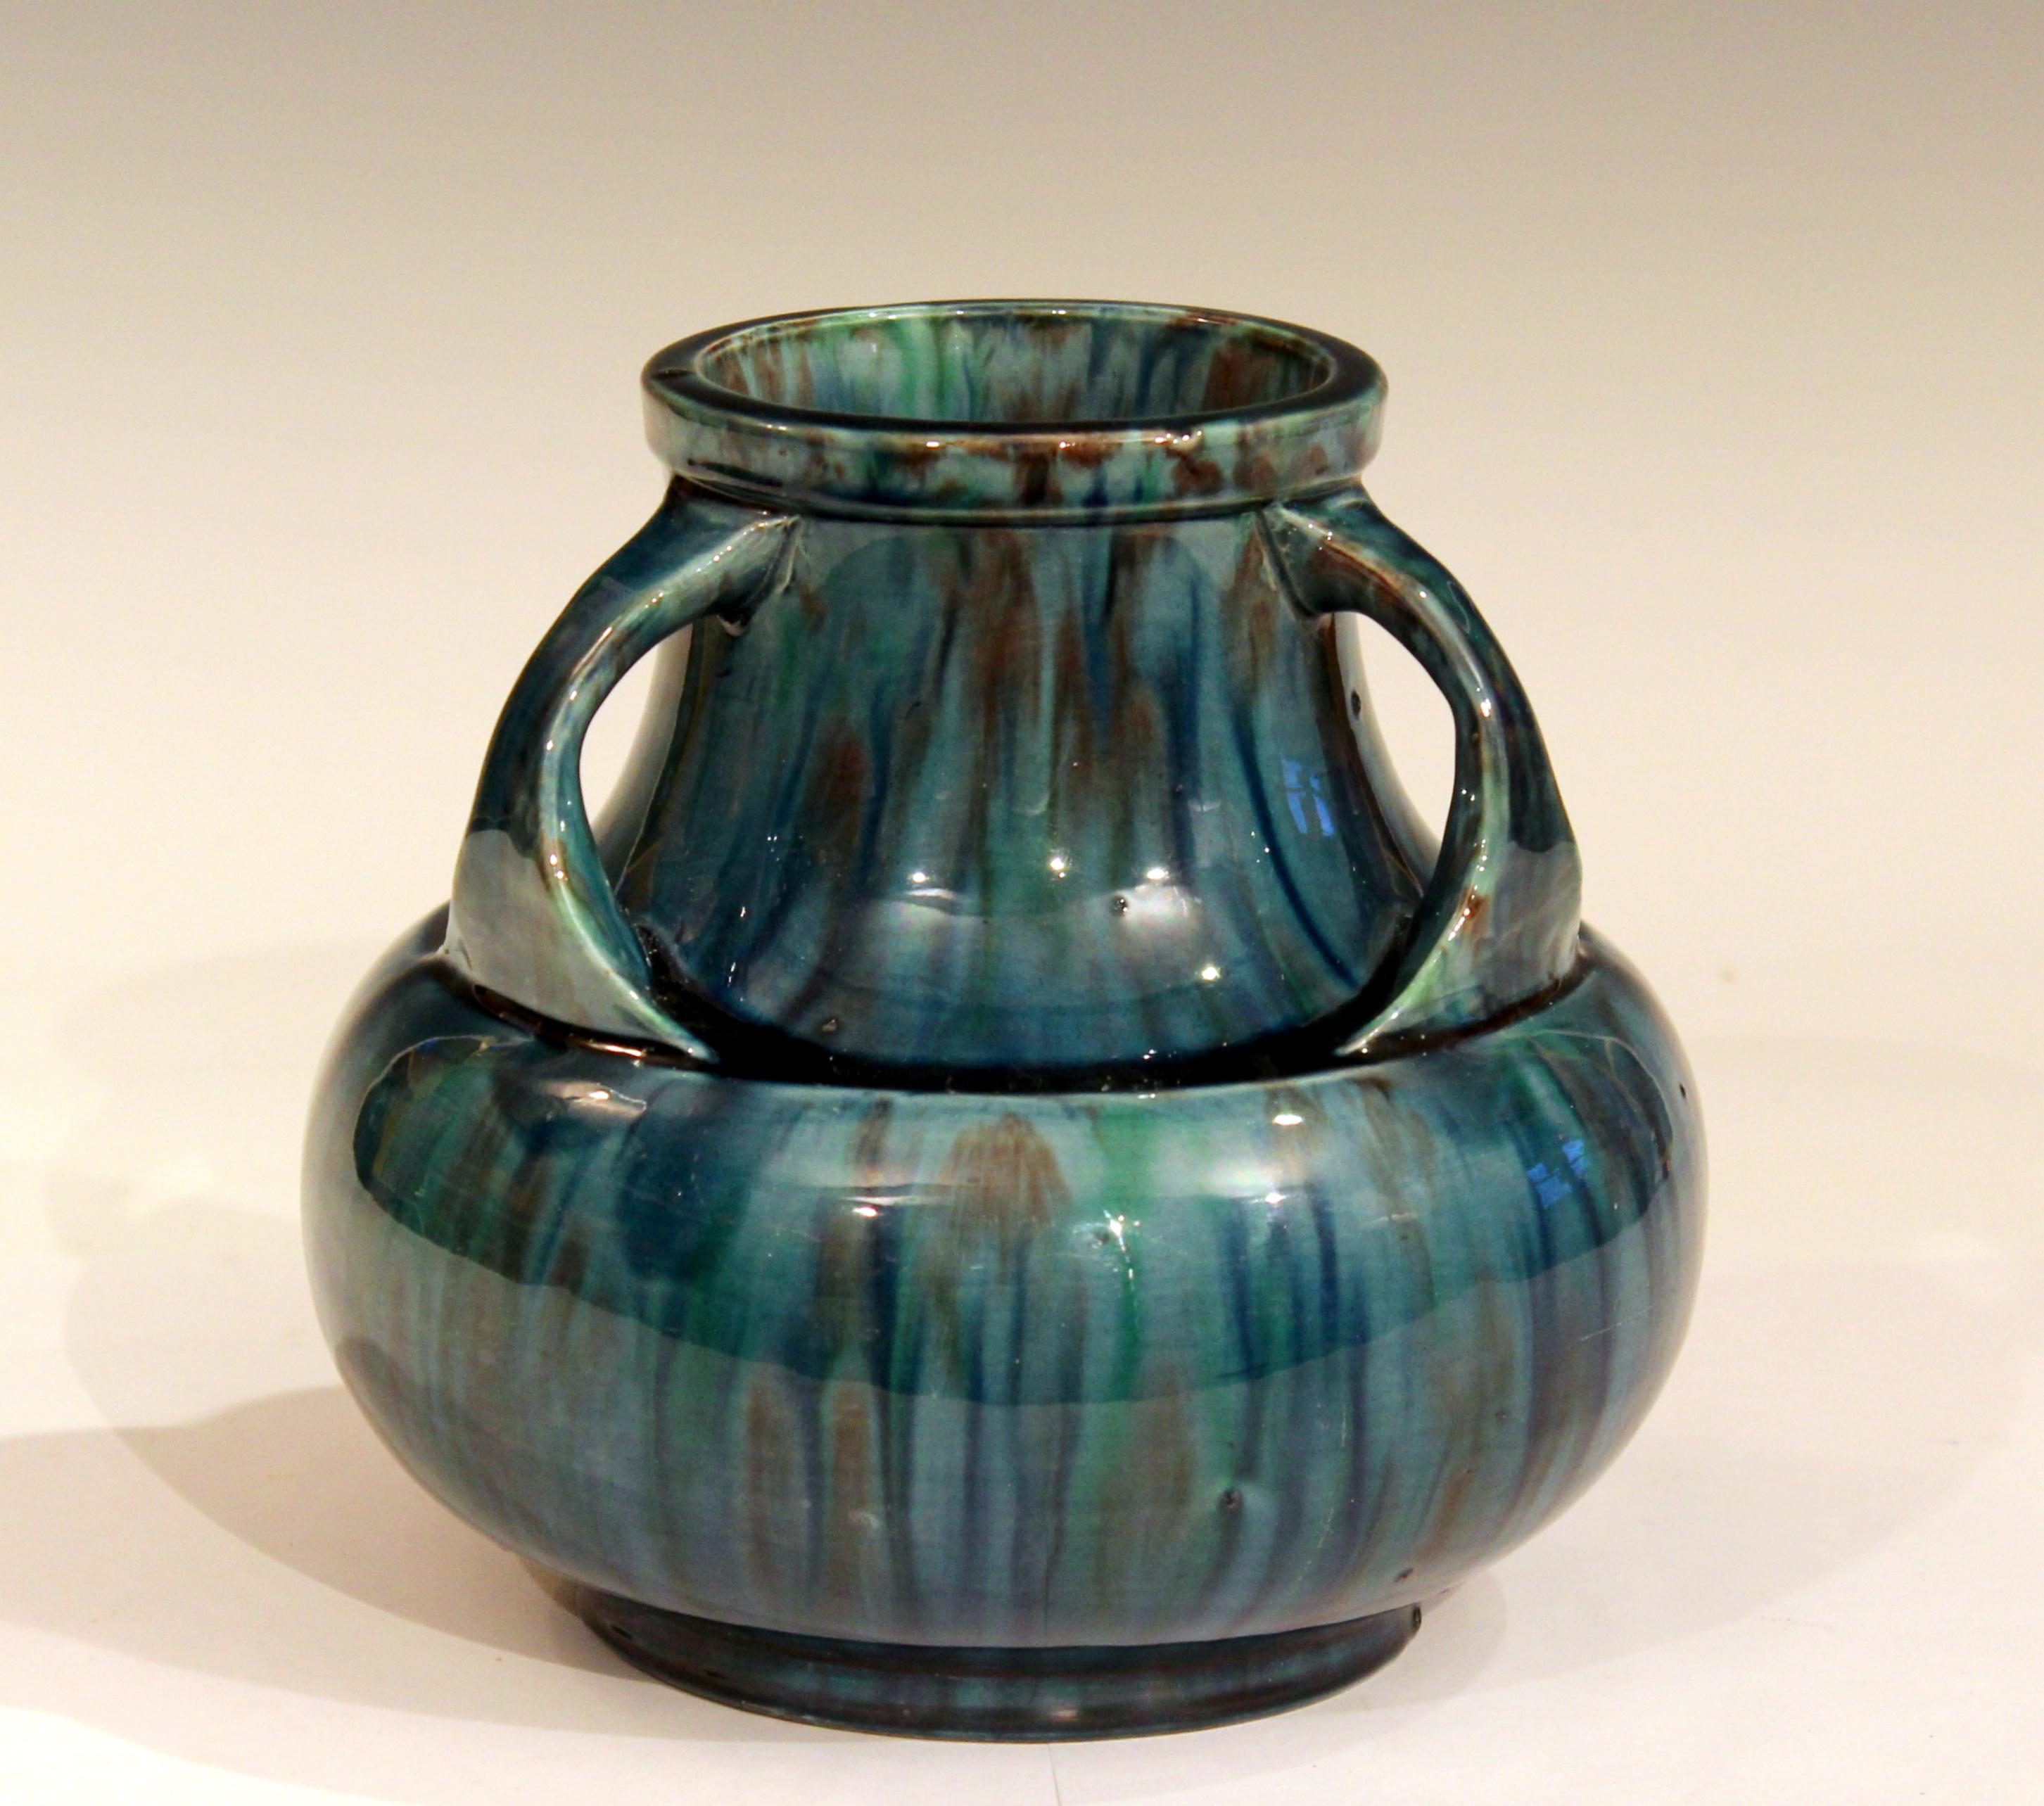 Awaji Pottery vase in Art Deco form with three handles curled over the wide, recessed shoulder and striking blue flambé glaze, circa 1930. Impressed marks. Measure: 6 1/2